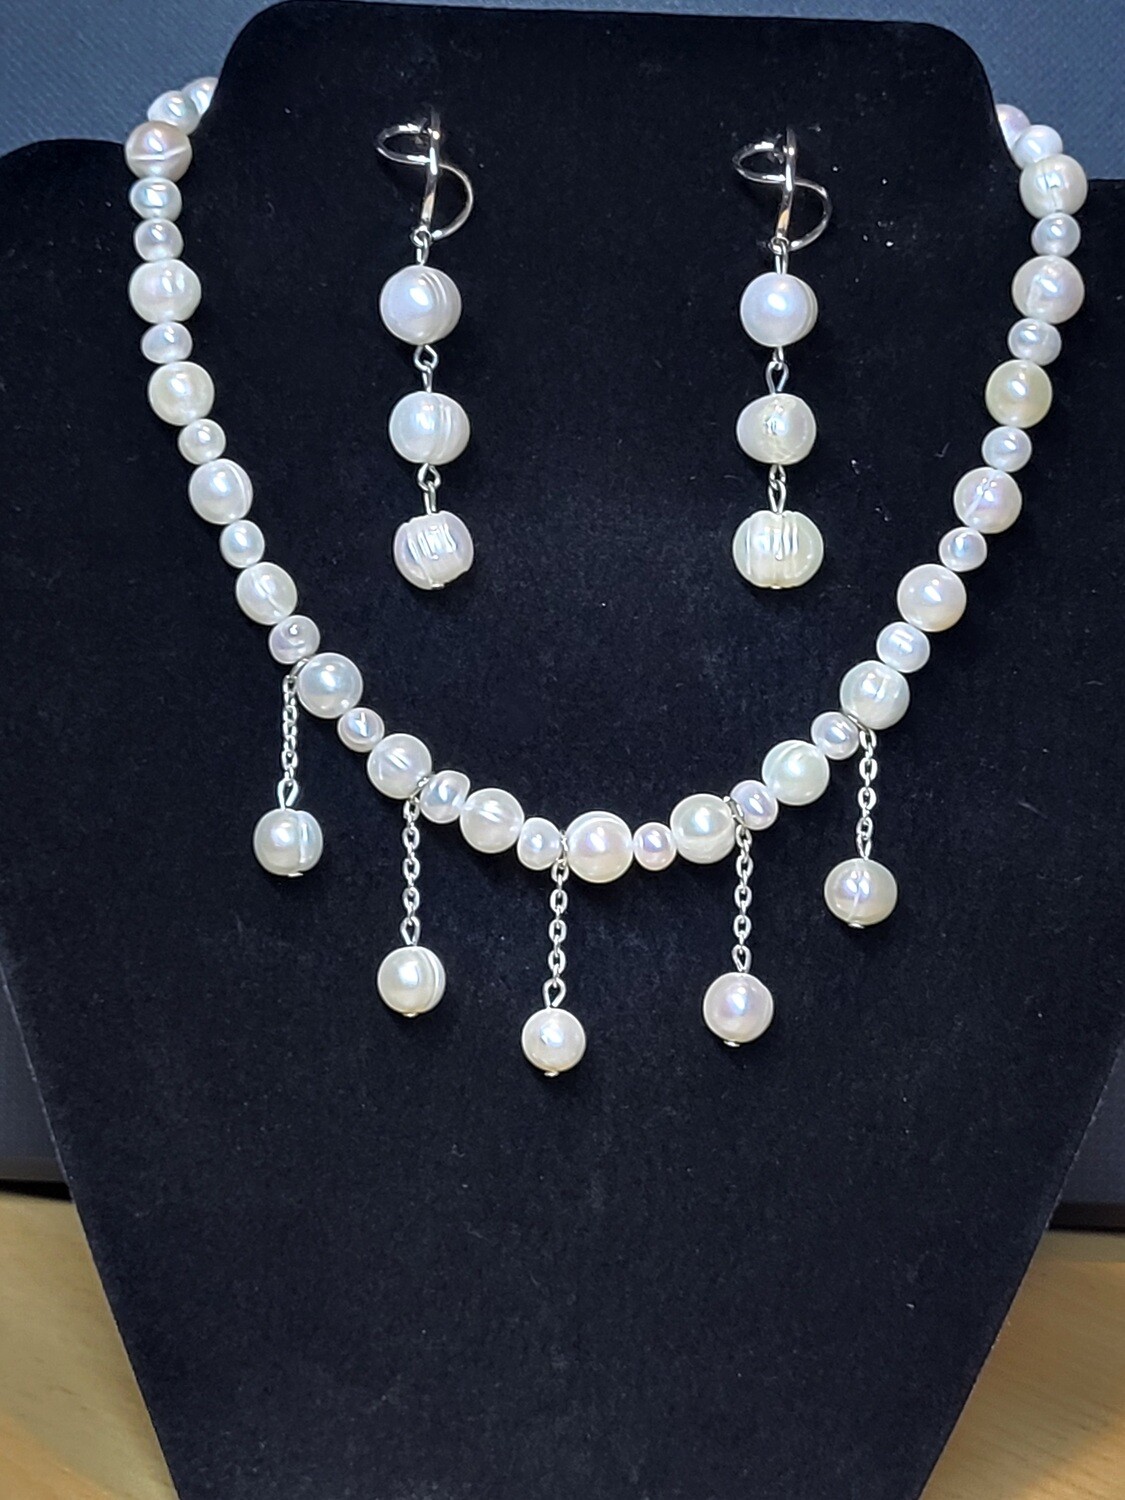 White Freshwater Pearl Necklace with Studs Earrings.